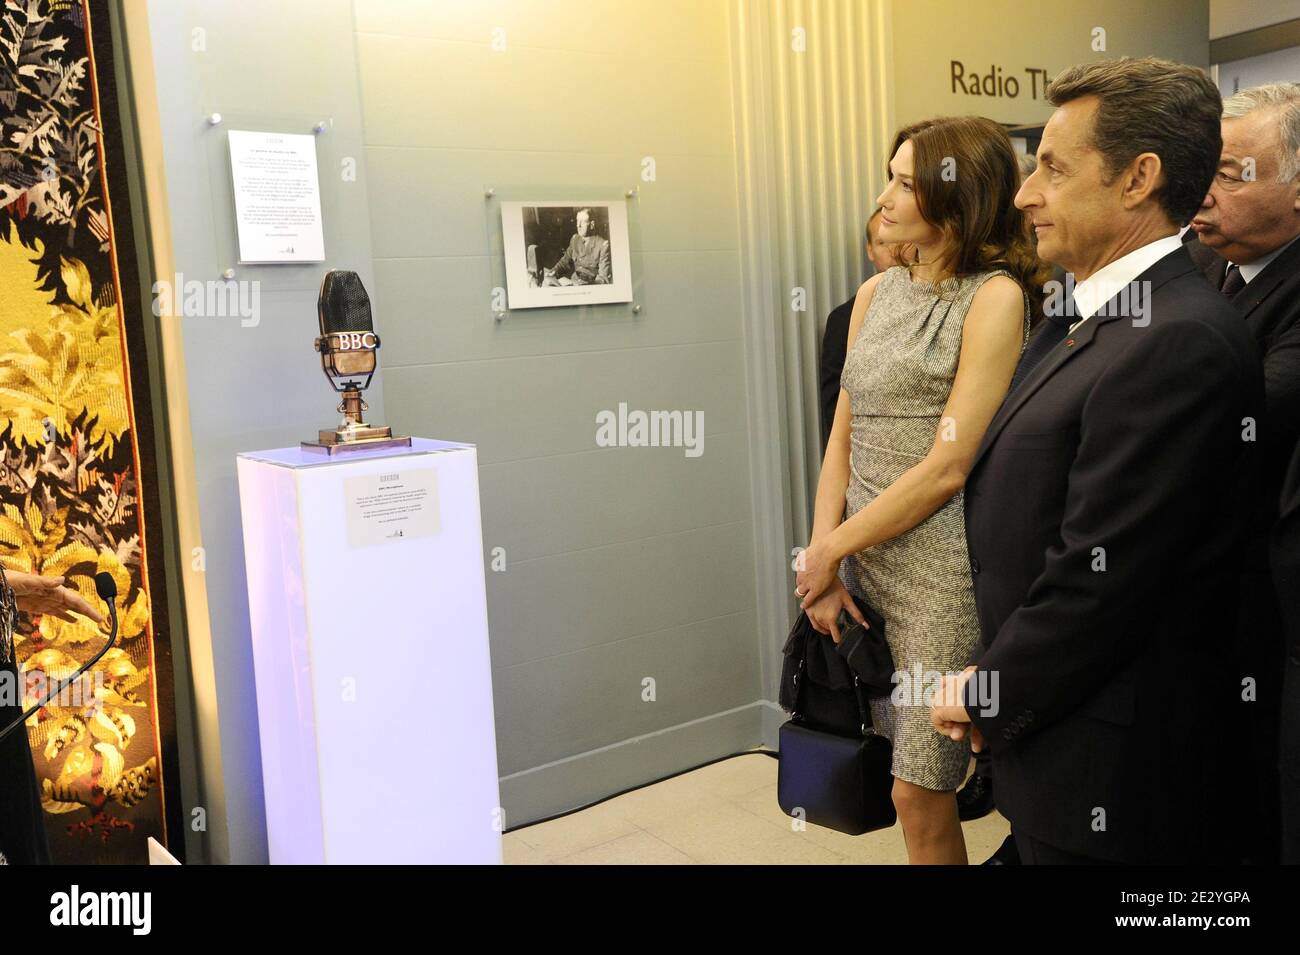 French President Nicolas Sarkozy and wife Carla Bruni-Sarkozy visit the BBC  Broadcasting House in London, UK on June 18, 2010. Nicolas Sarkozy and  World War II veterans visited London to mark the